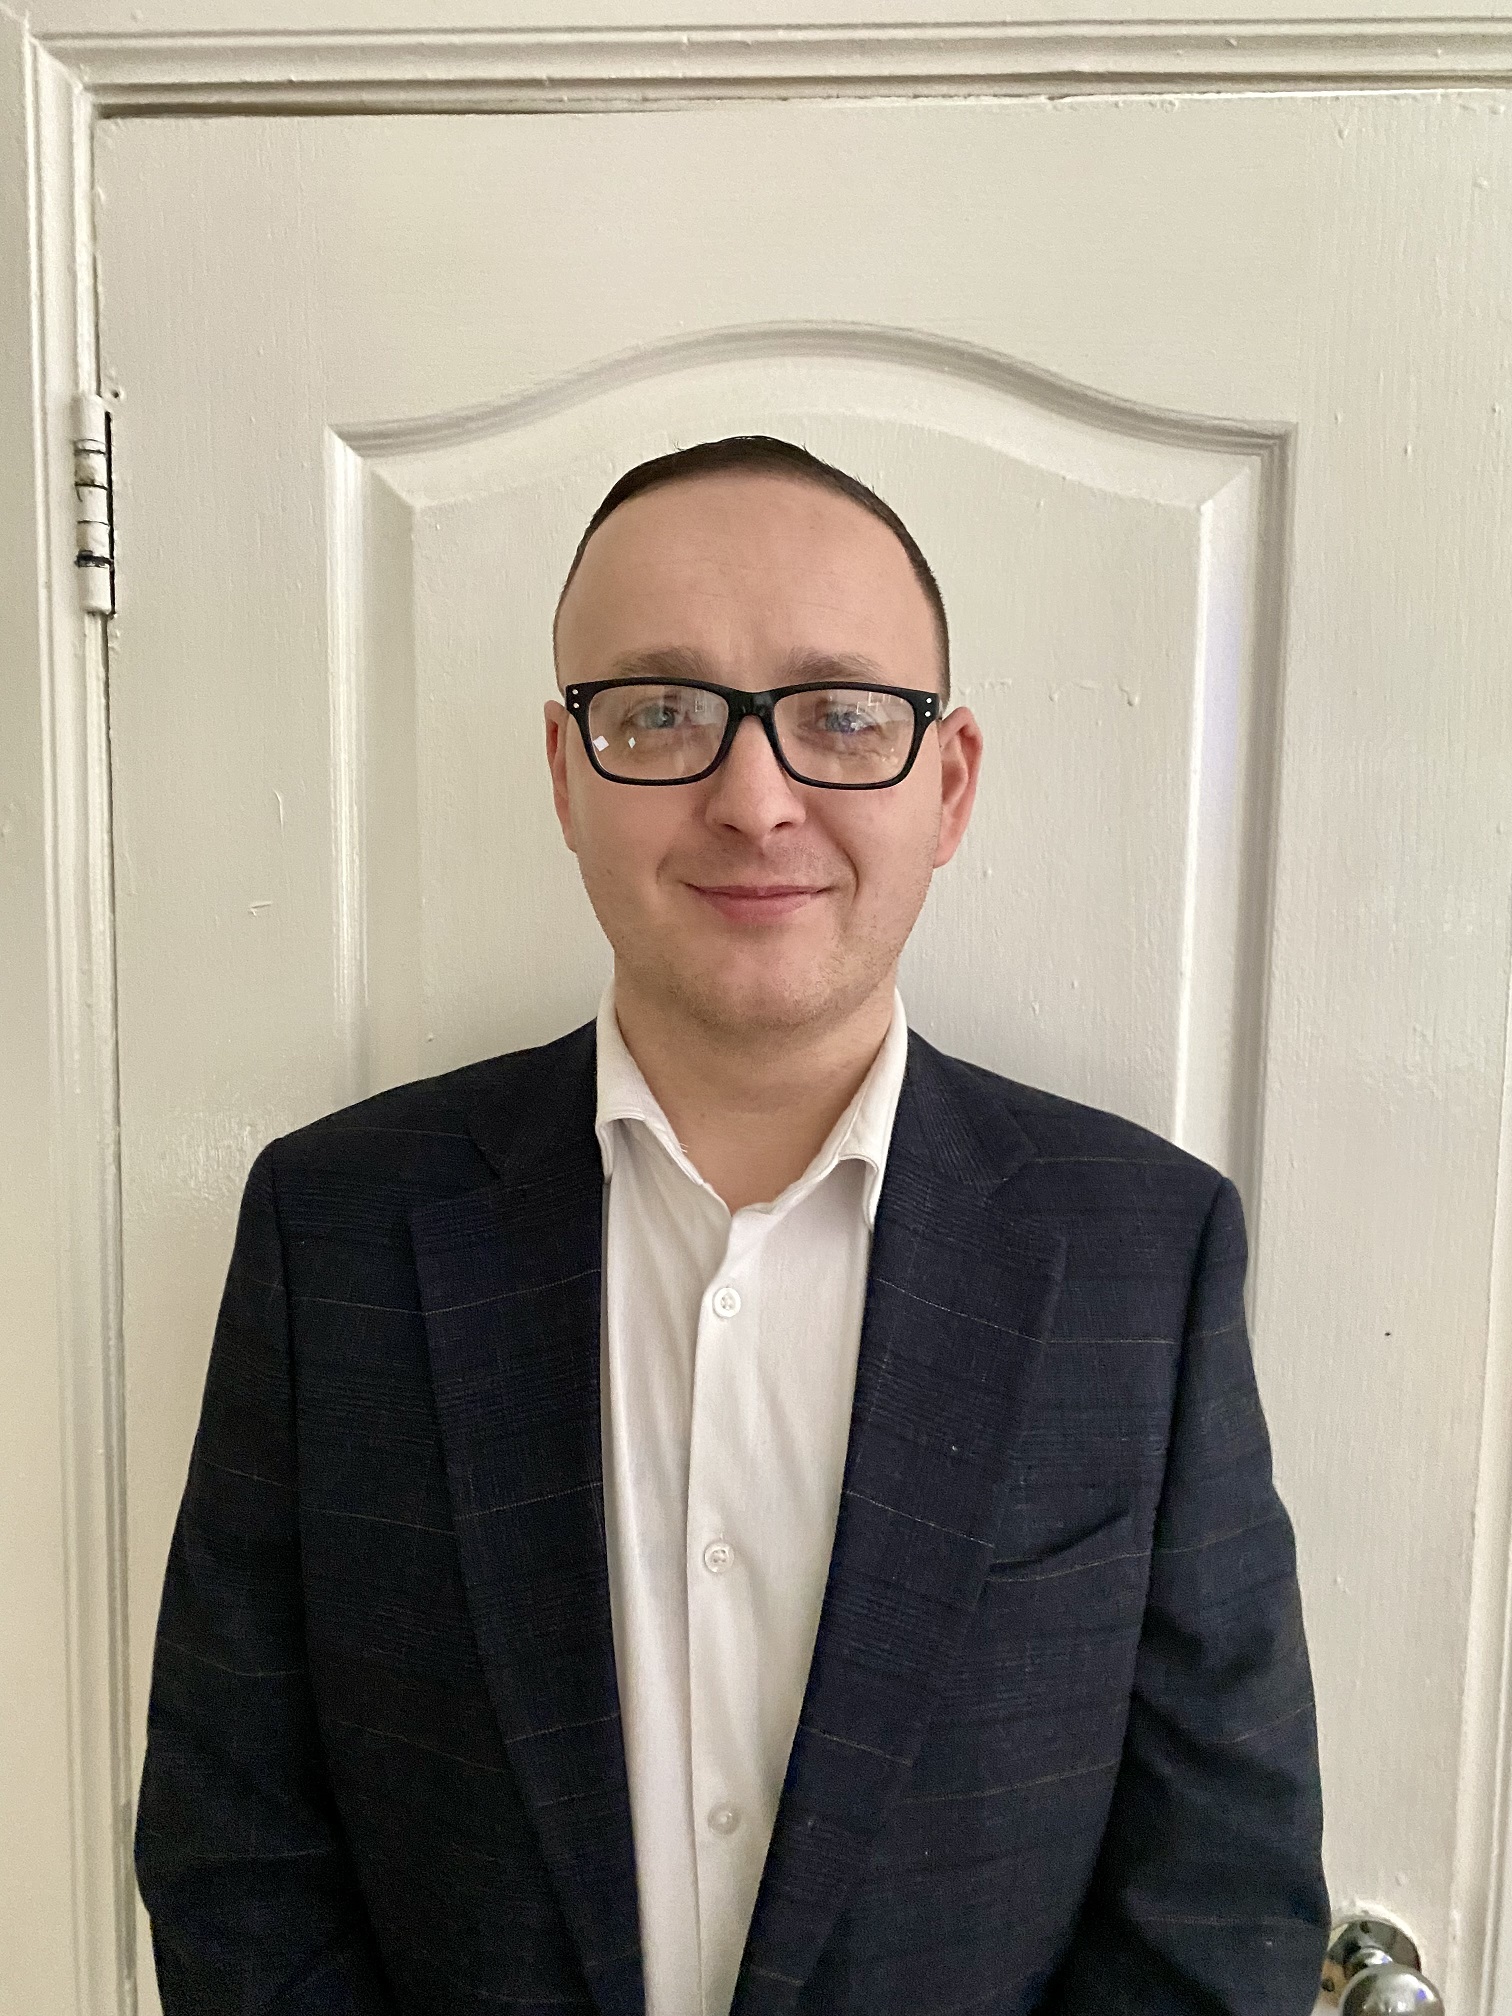 Gareth pictured inside wearing a suit and glasses